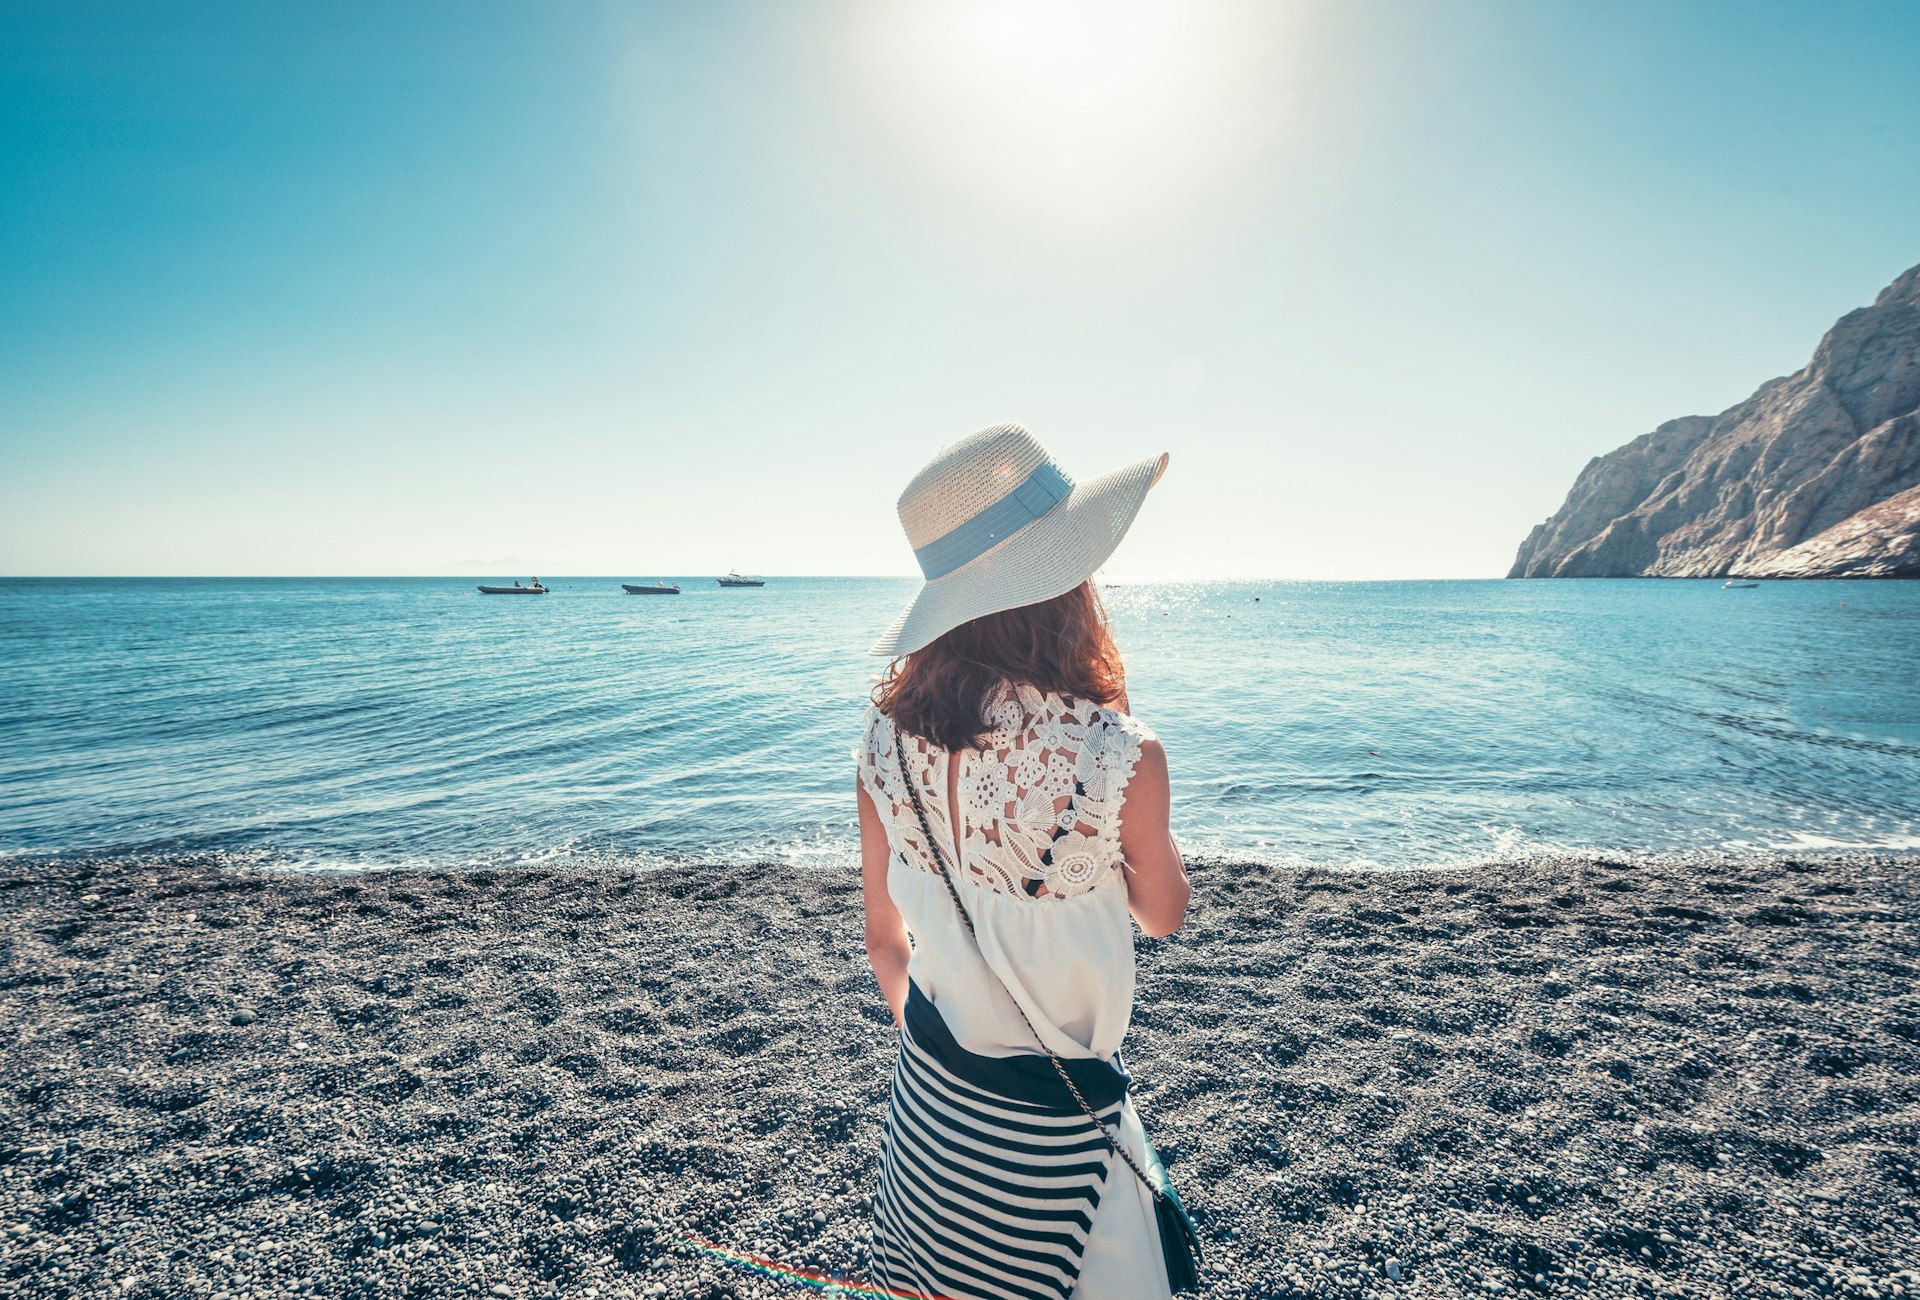 A woman stands alone on the beach and stares out at the sea in Santorini